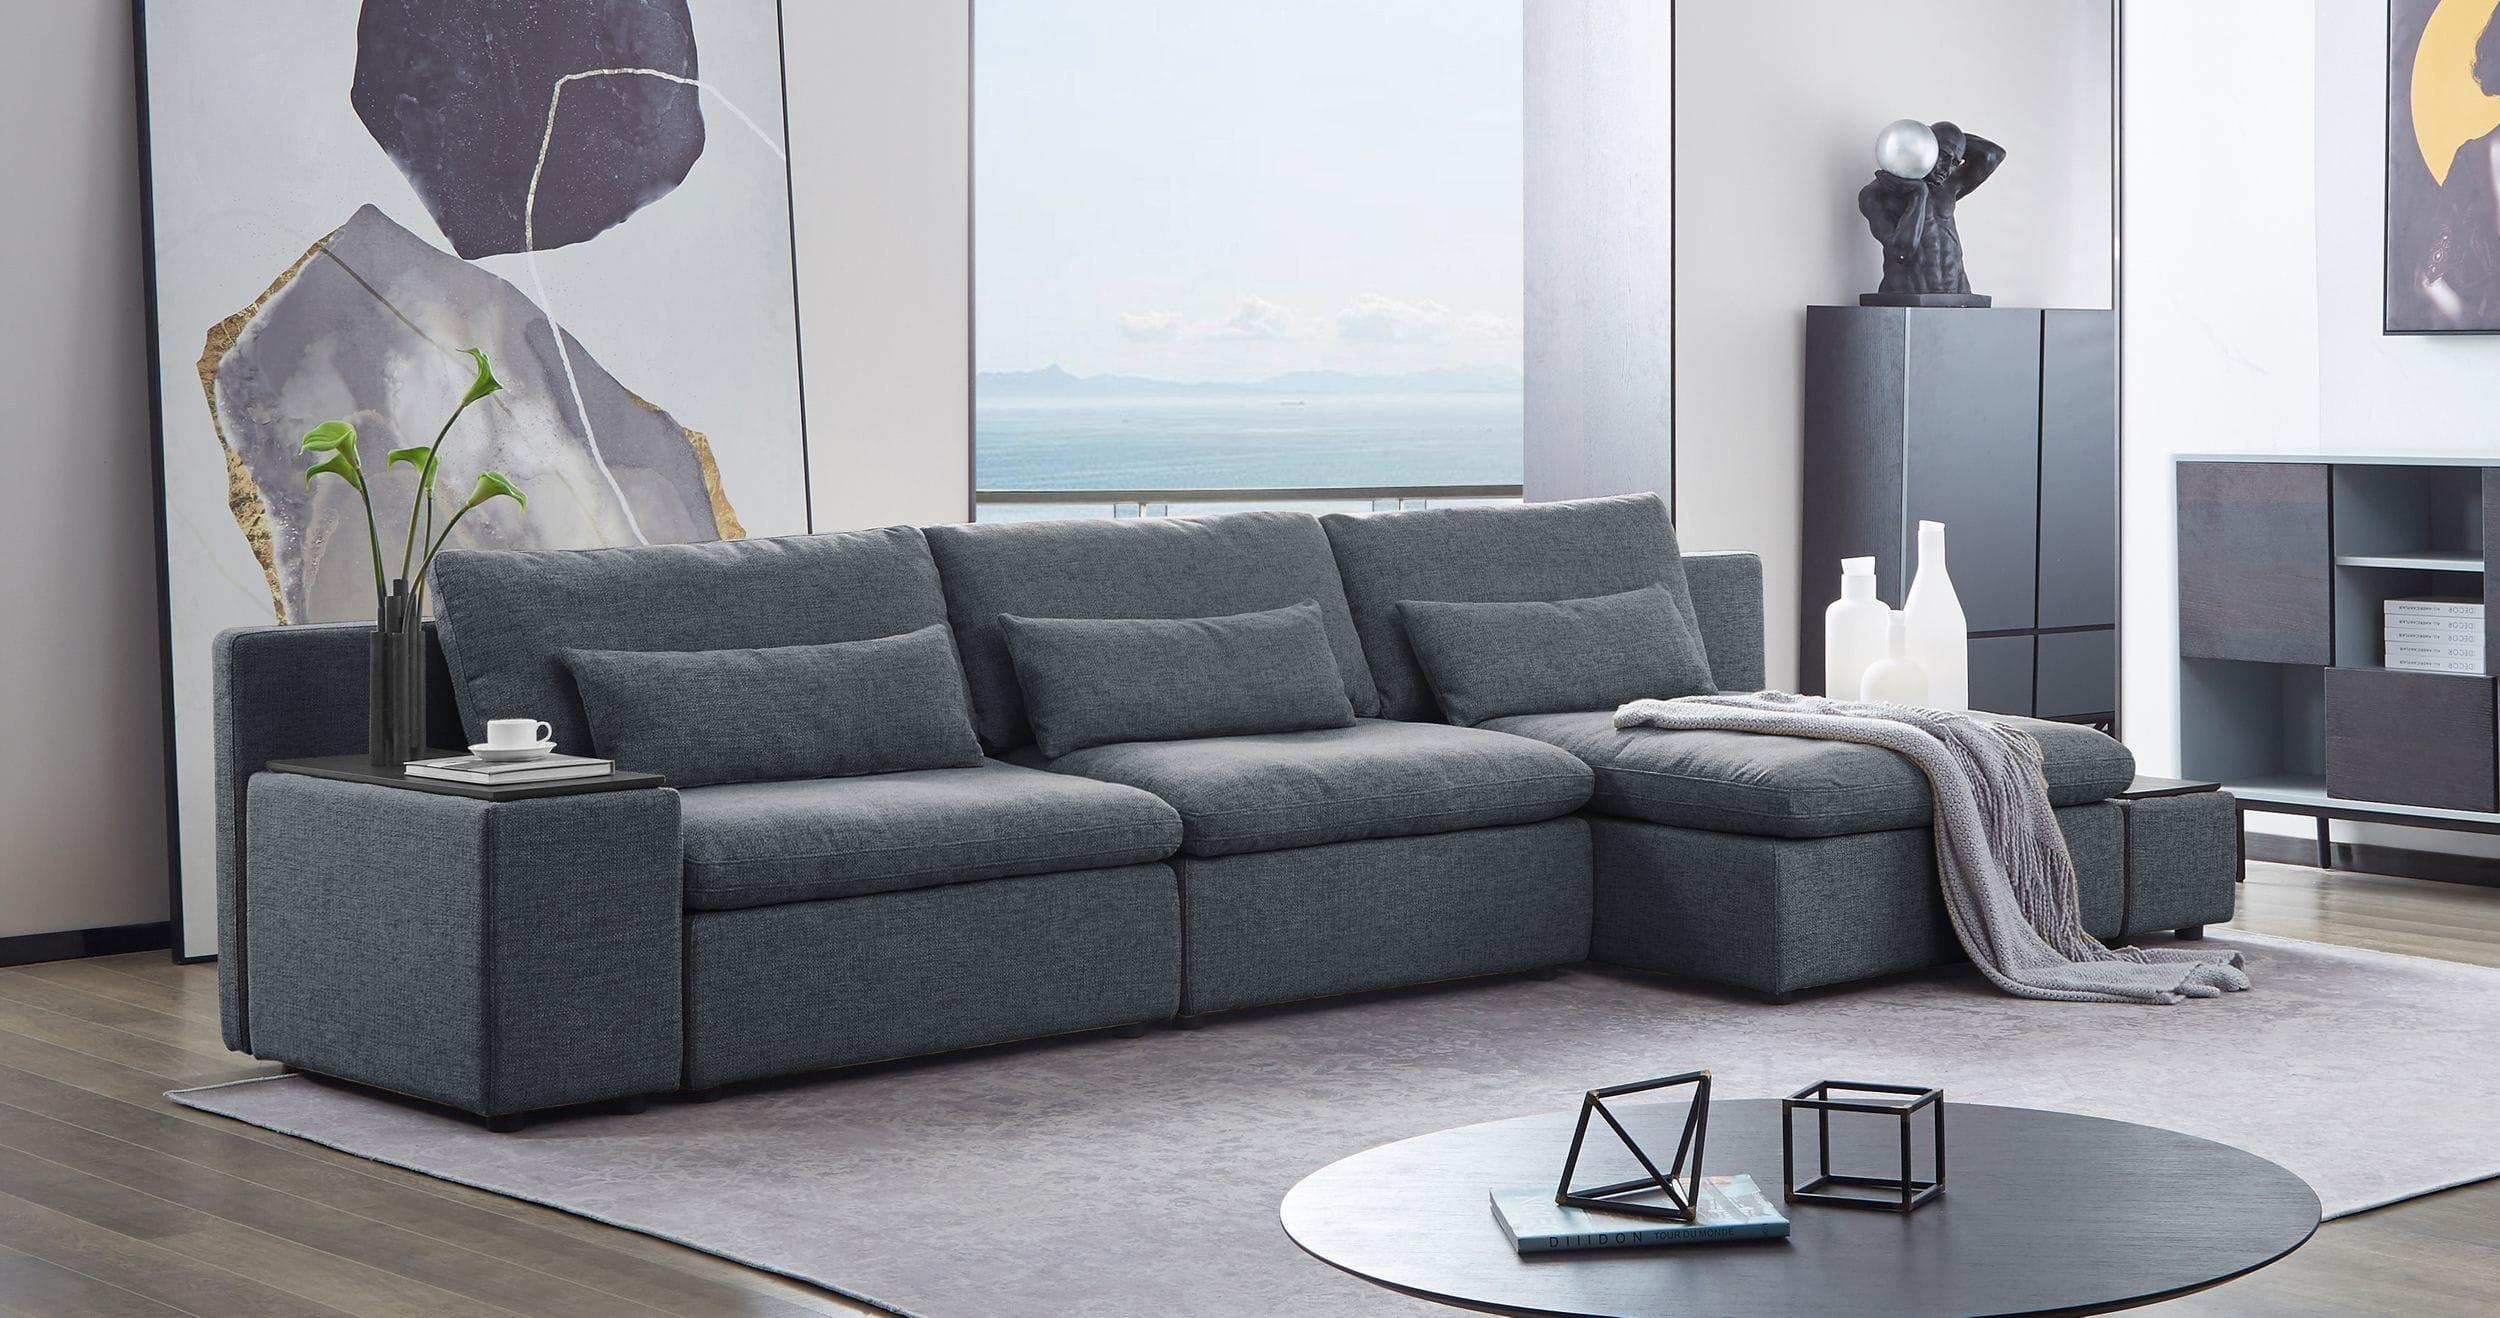 Contemporary, Modern Sectional Sofa VGMB-C008 VGMB-C008 in Gray Fabric